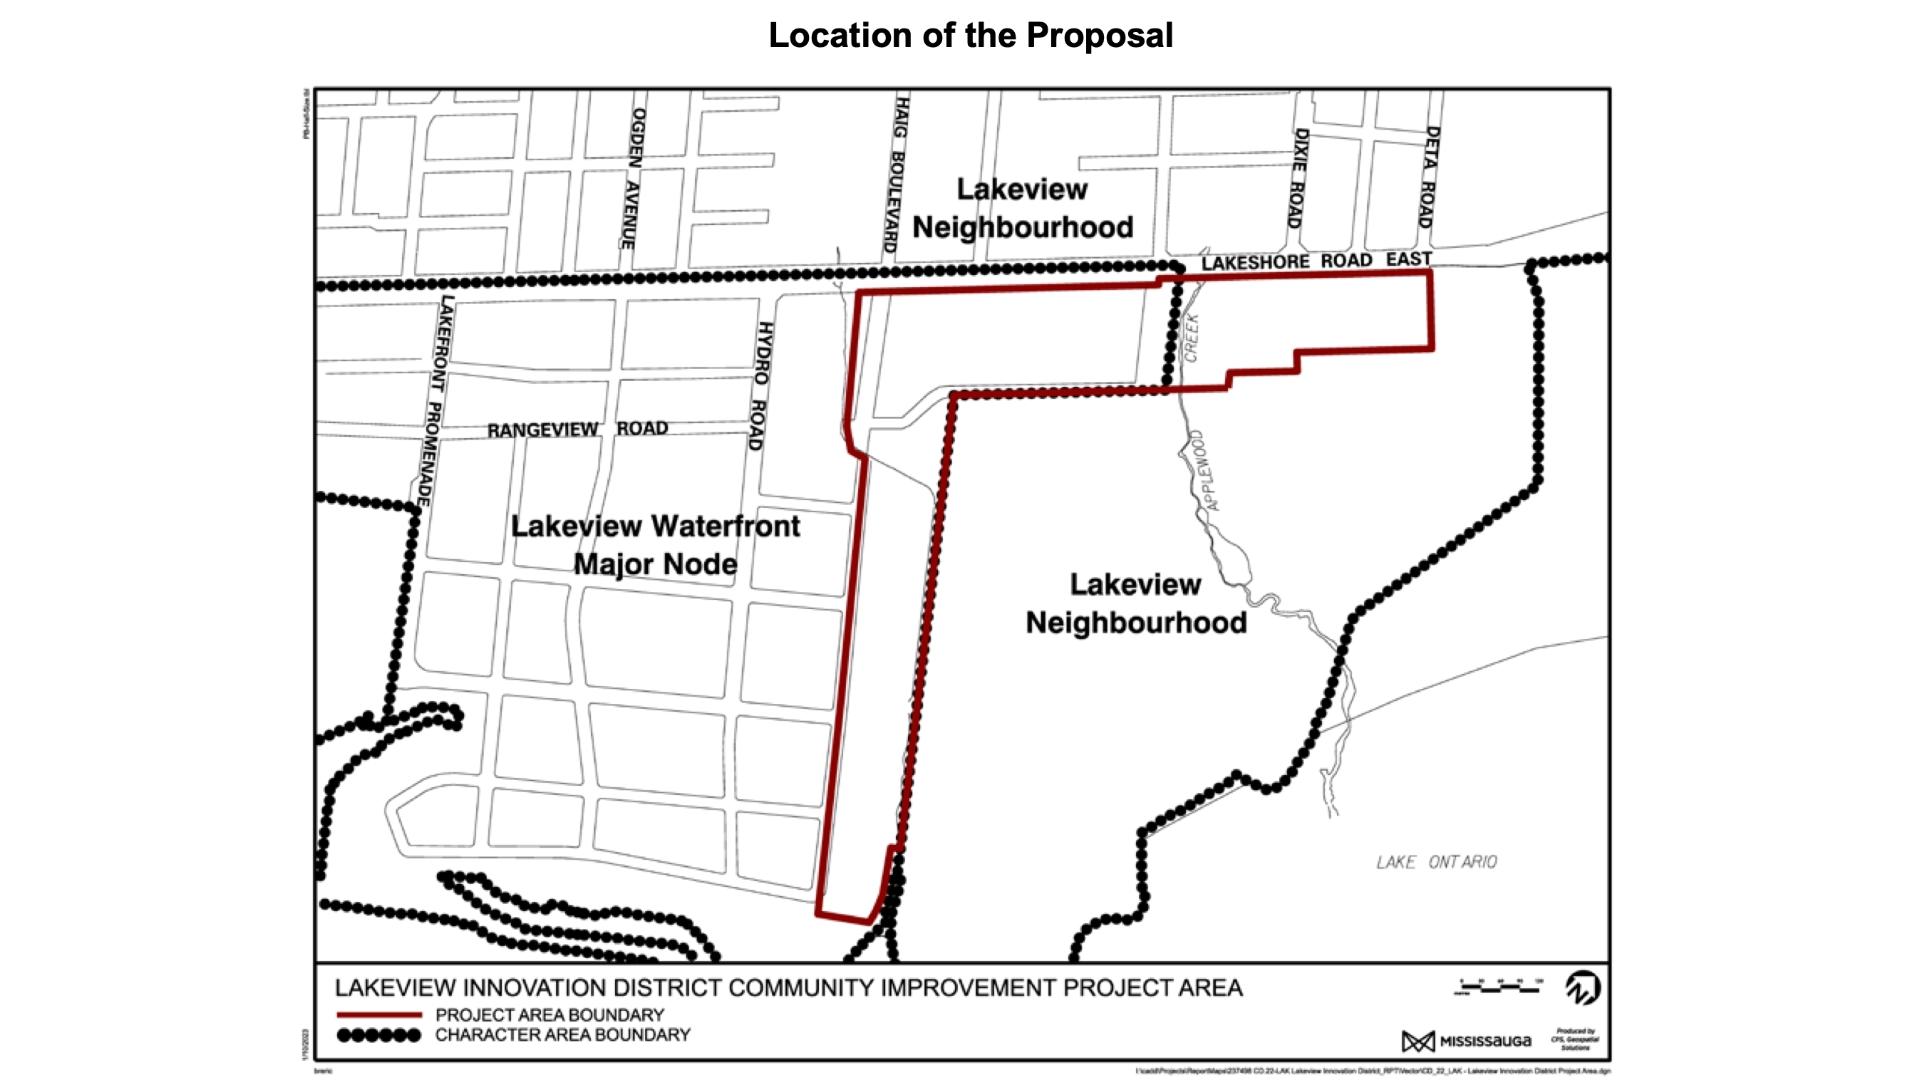 Lakeview Innovation District Community Improvement Plan